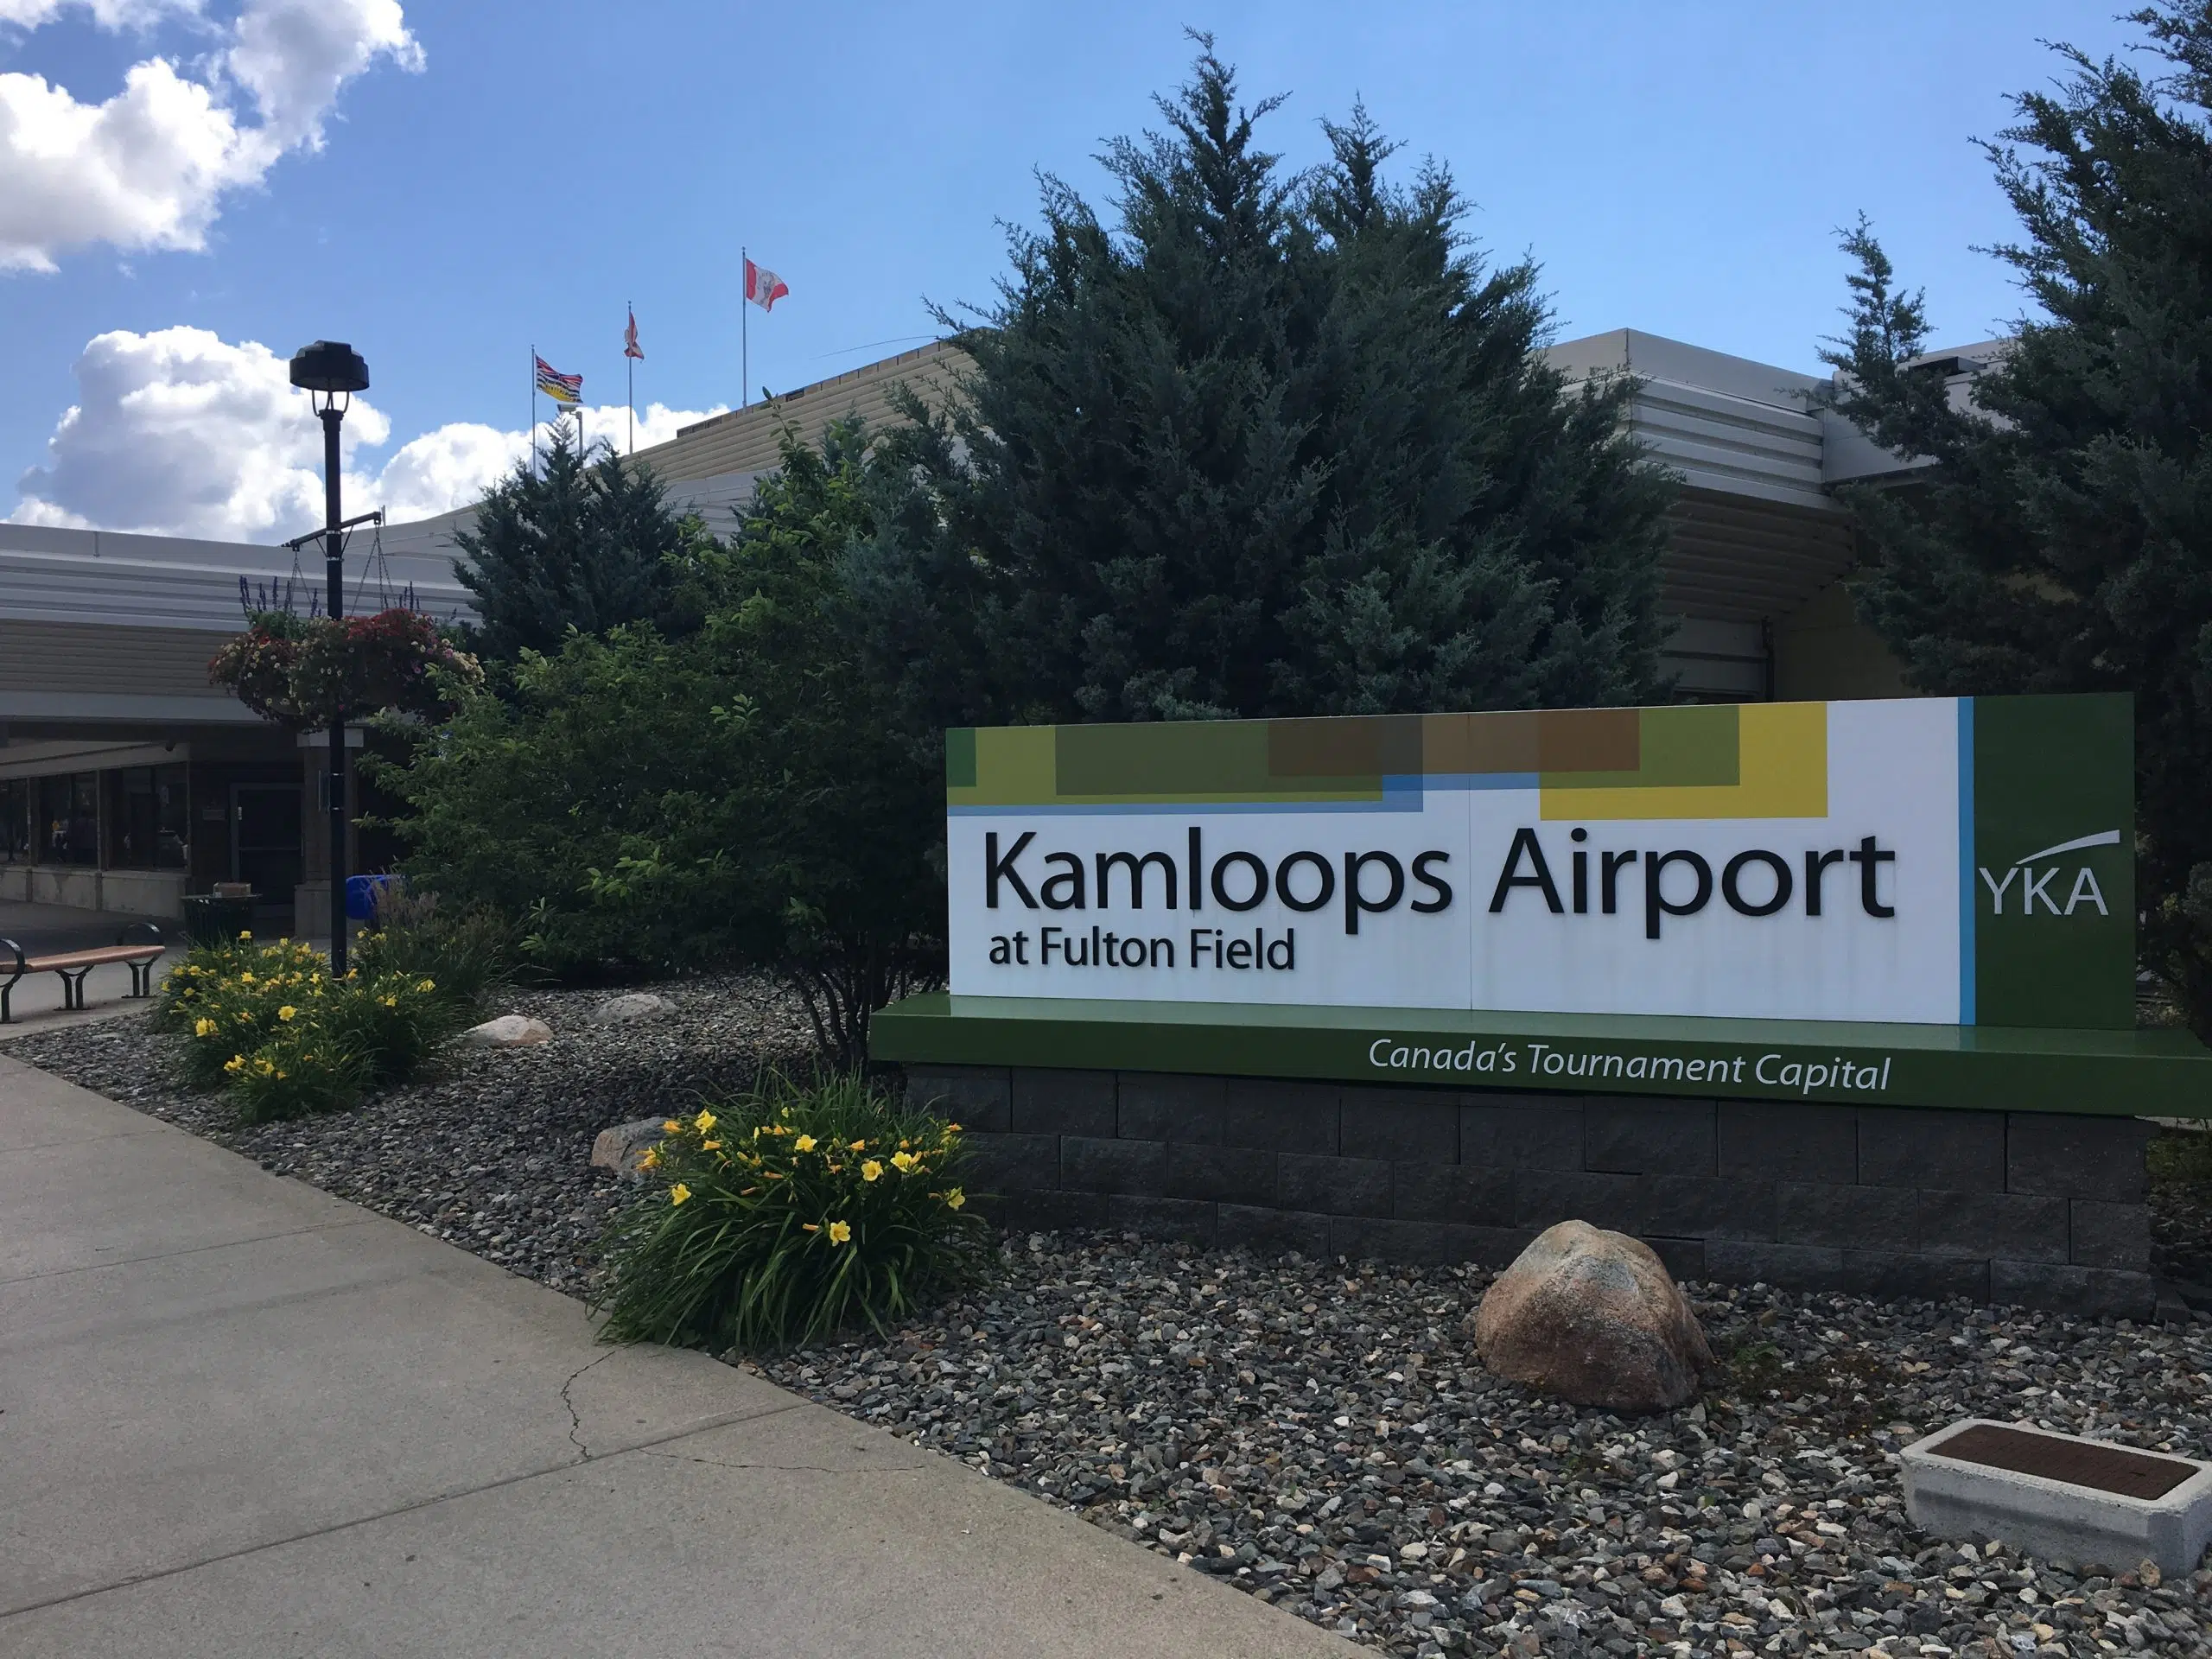 Kamloops Airport sees 124,000 passengers in 2020 after back-to back record years